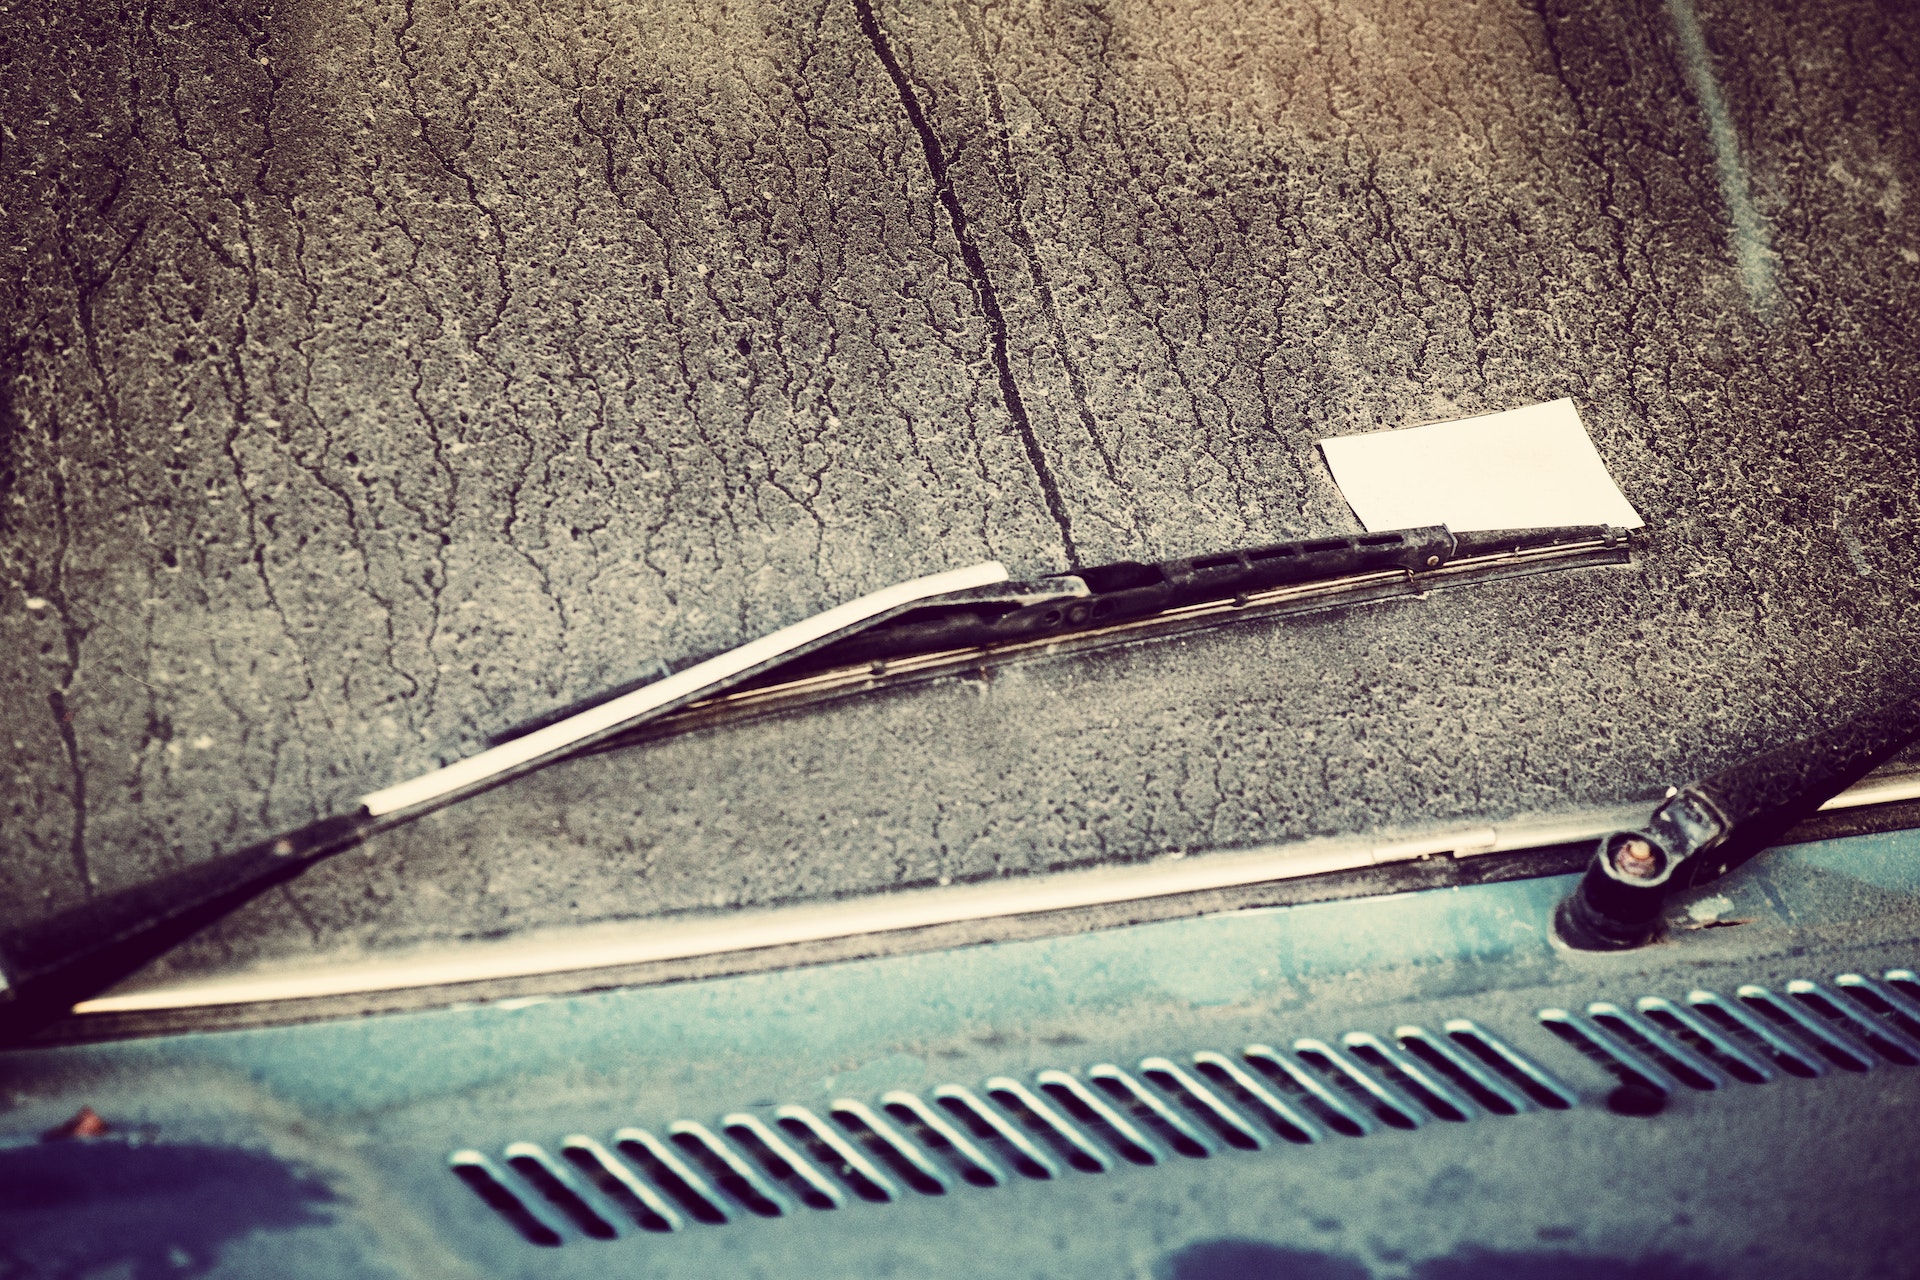 Windshield wipers on old car